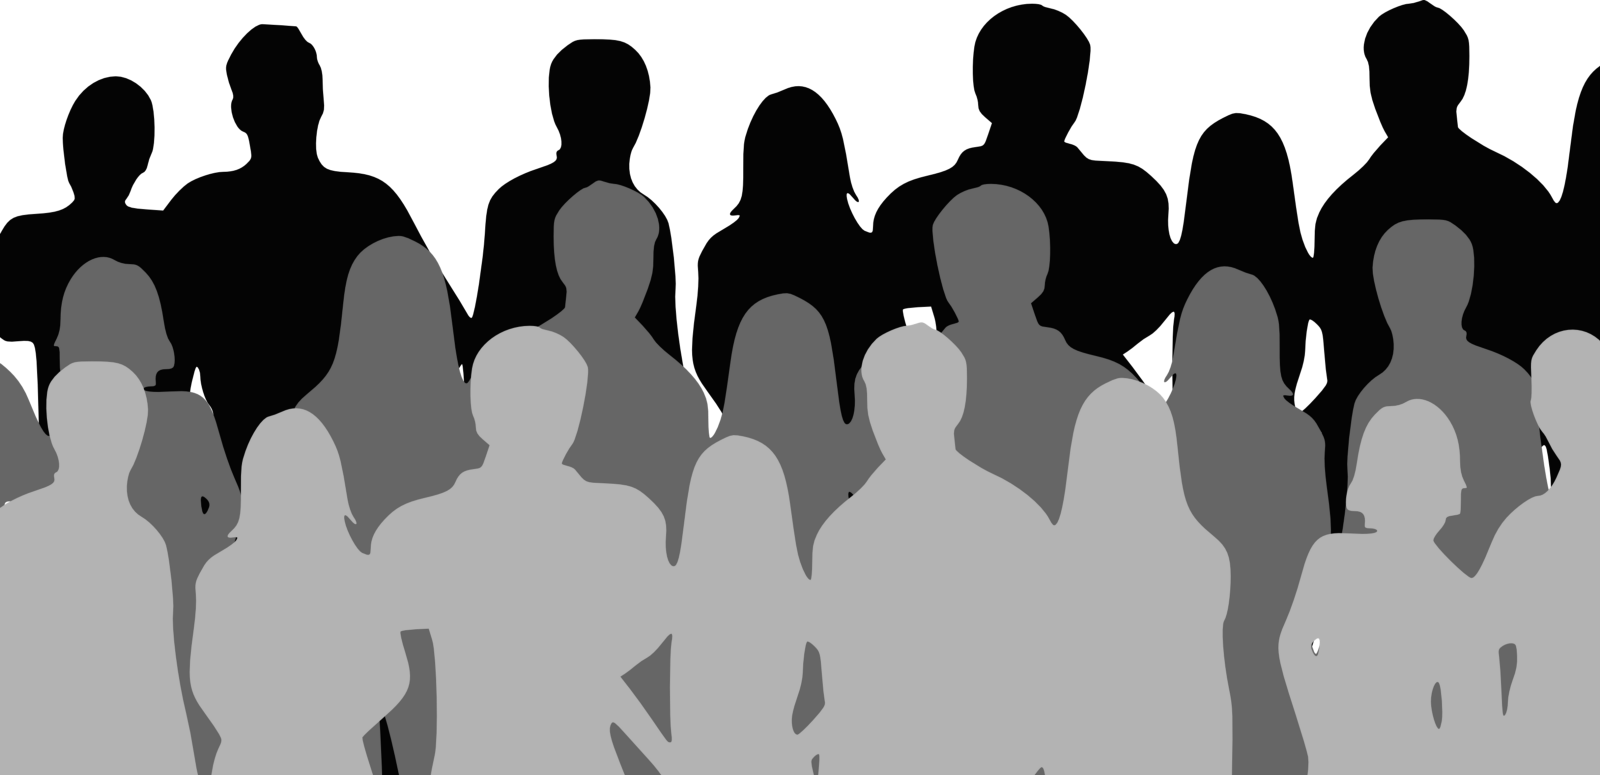 Community clipart silhouette. Audience at getdrawings com